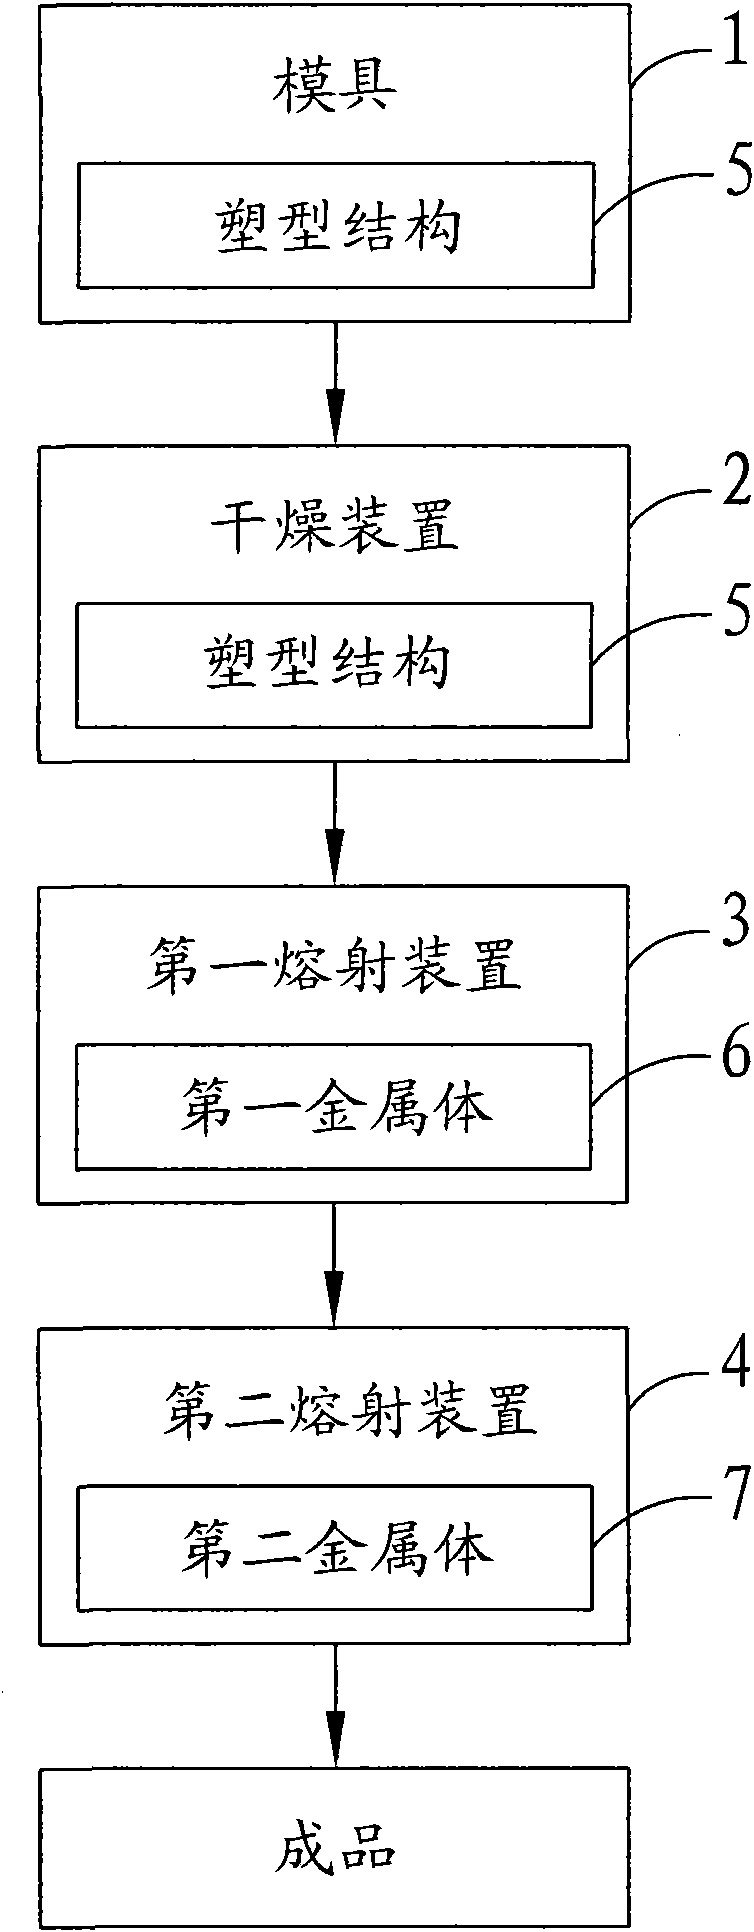 Shell manufacturing method